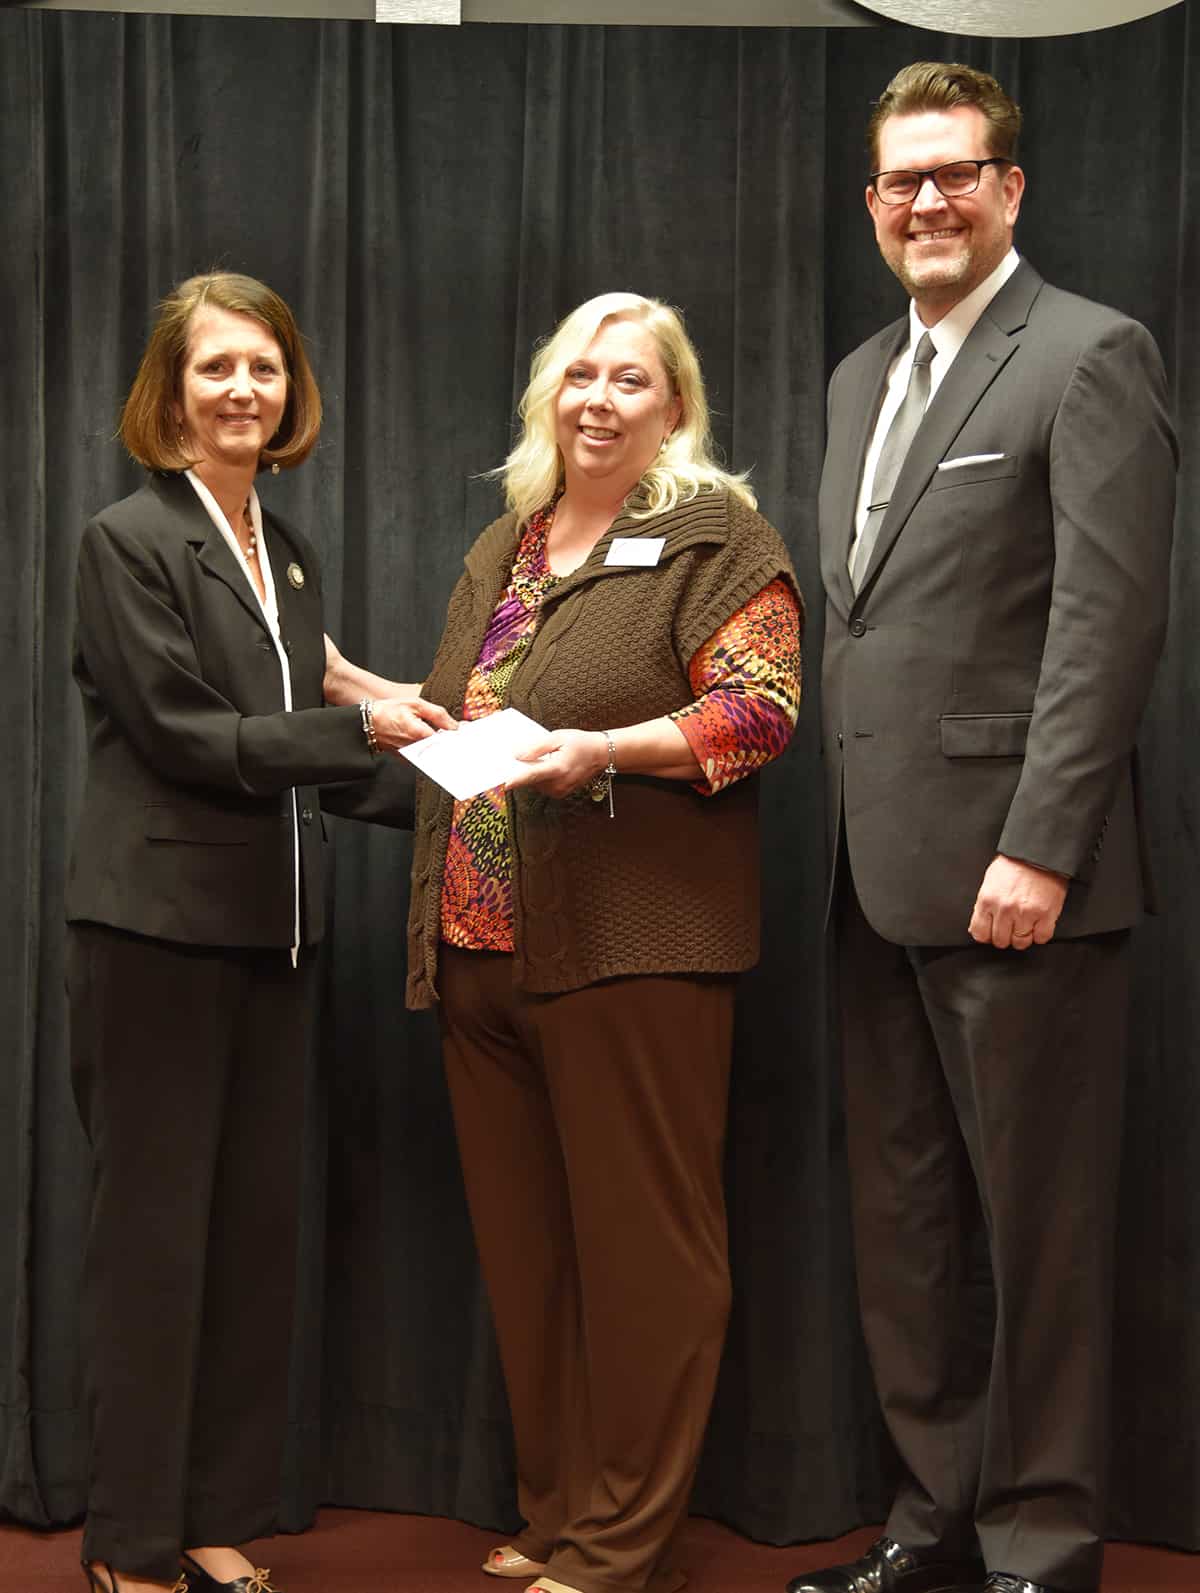 SB&T’s Tami Duke is shown above (l to r) presenting Teresa McCook with a donation from SB&T for being selected as the South Georgia Technical College 2018 Instructor of the Year. Dr. John Watford, SGTC President is also shown thanking Duke and SB&T for their support of the college and its instructors.